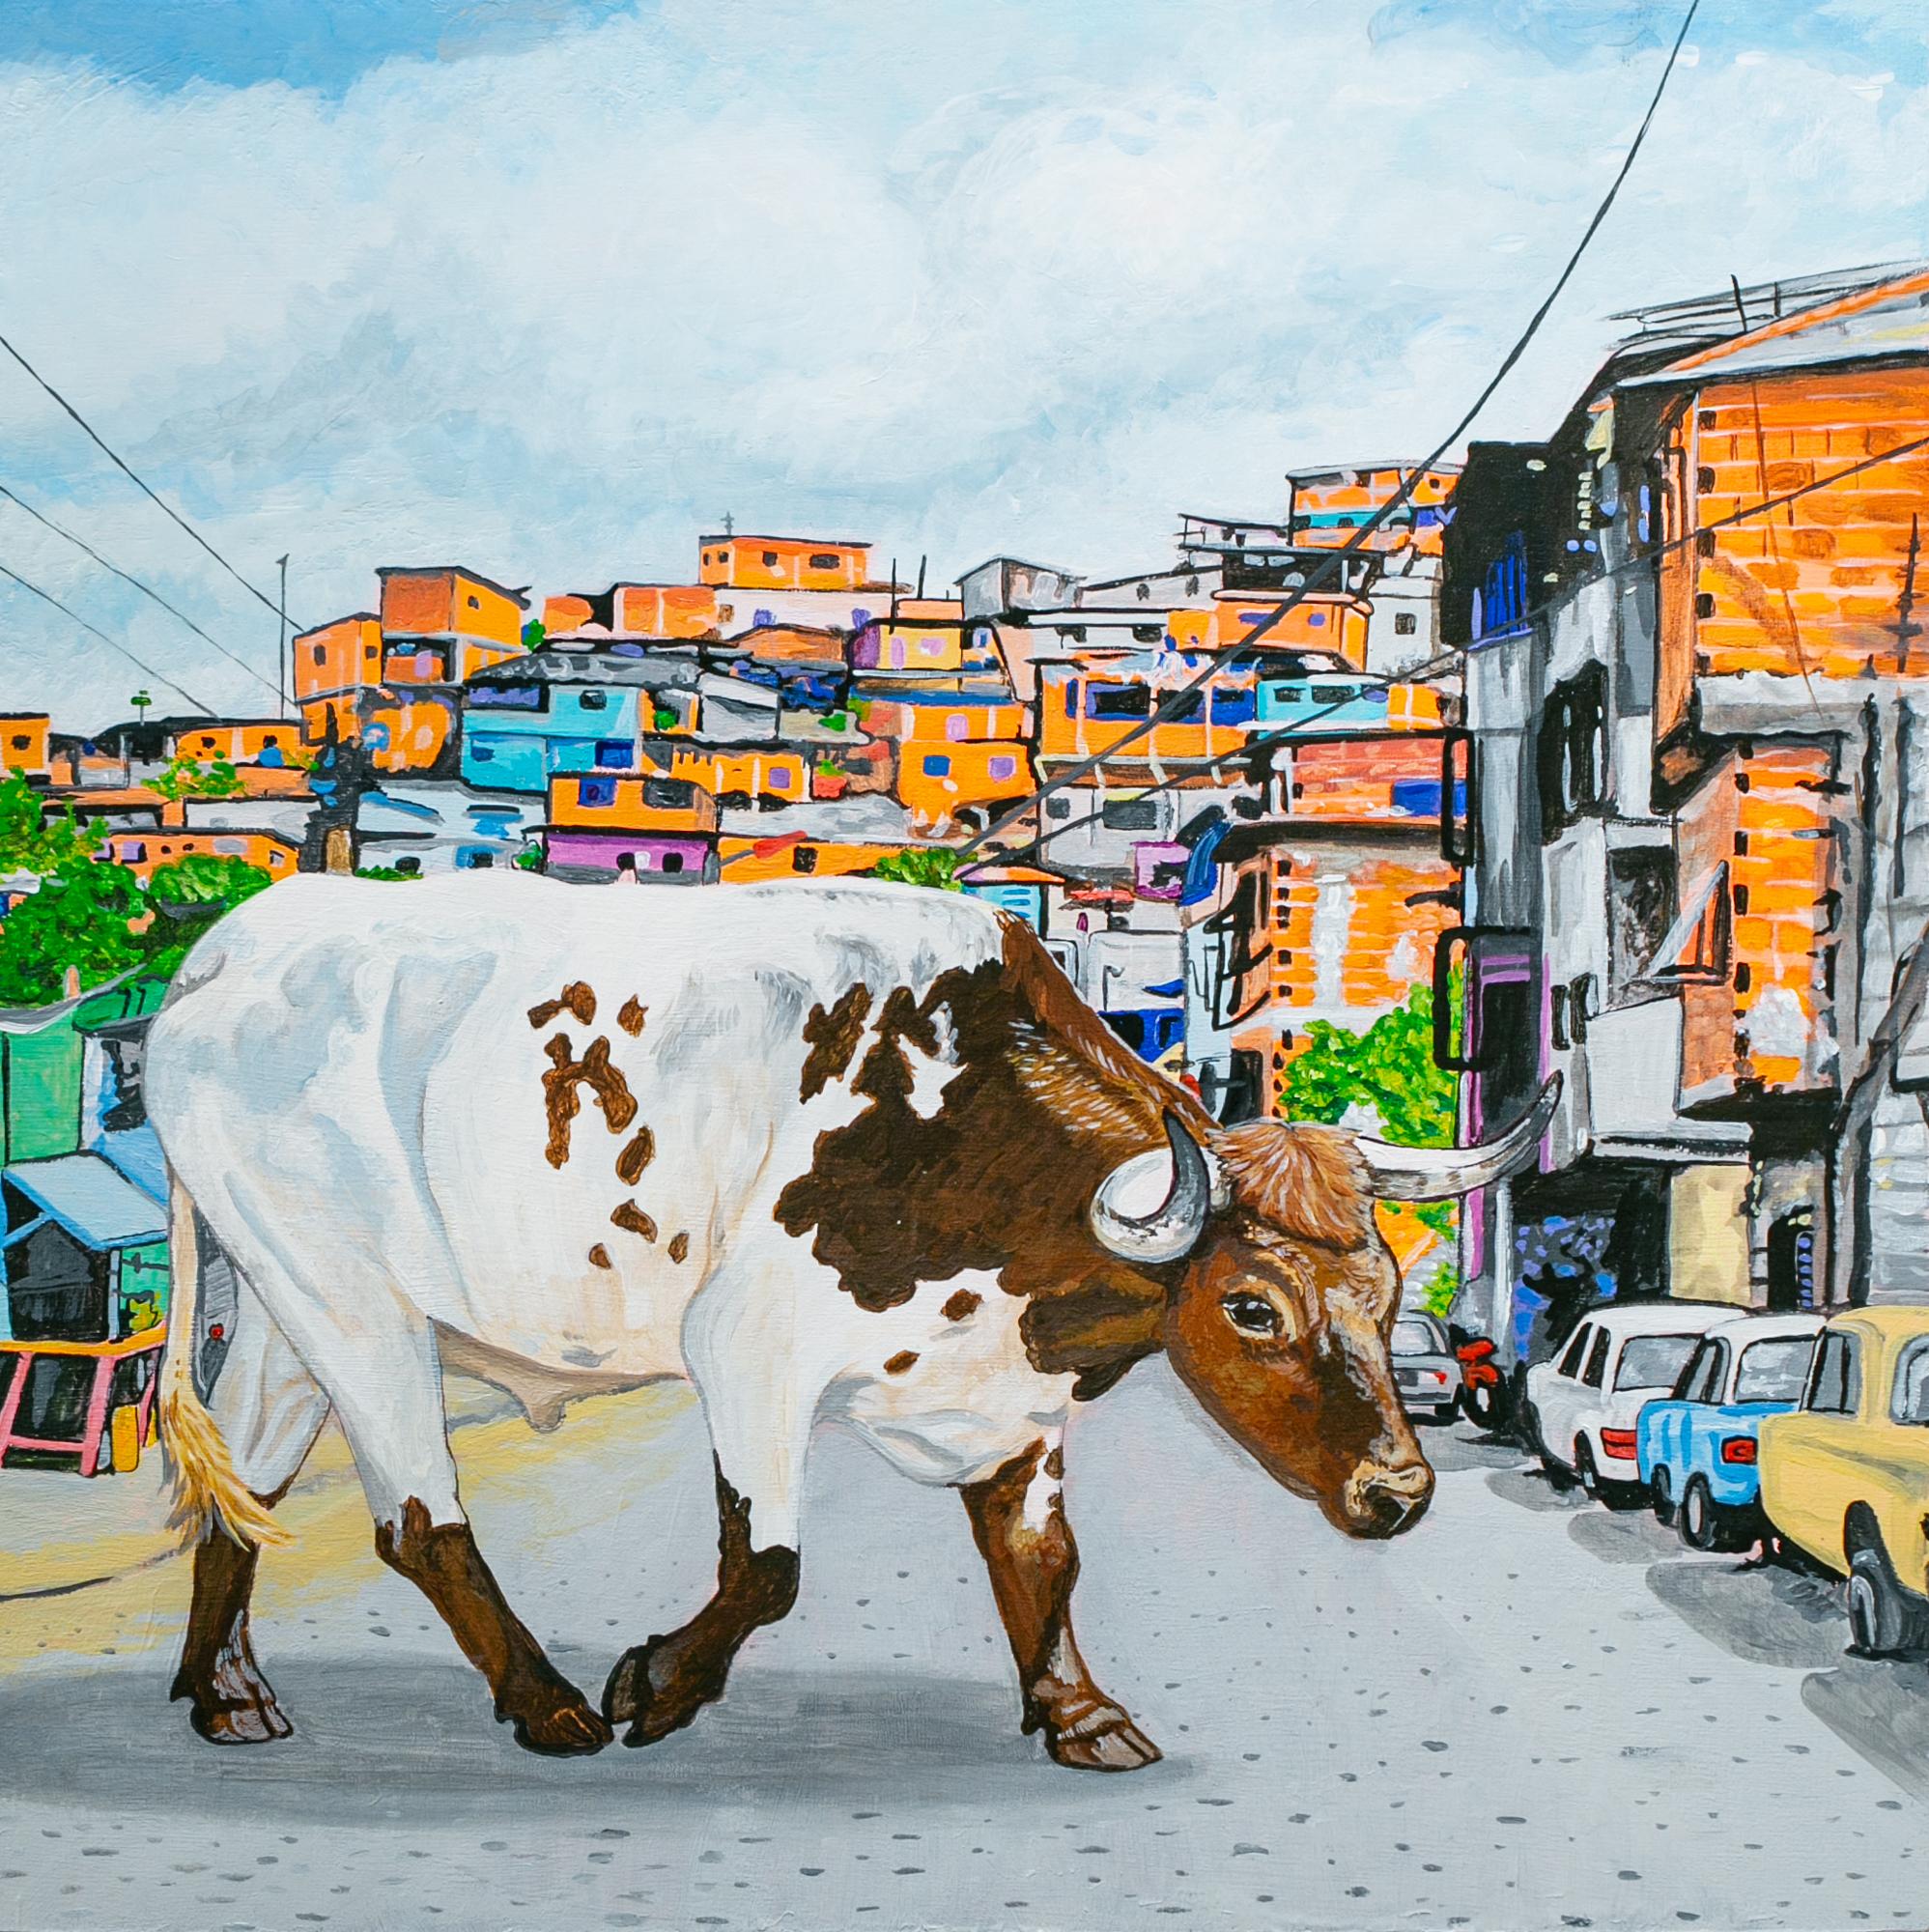 Neil M Perry Figurative Painting - "Contra", Cityscape, Cow, Bull, Animal, Acrylic Painting, Figurative